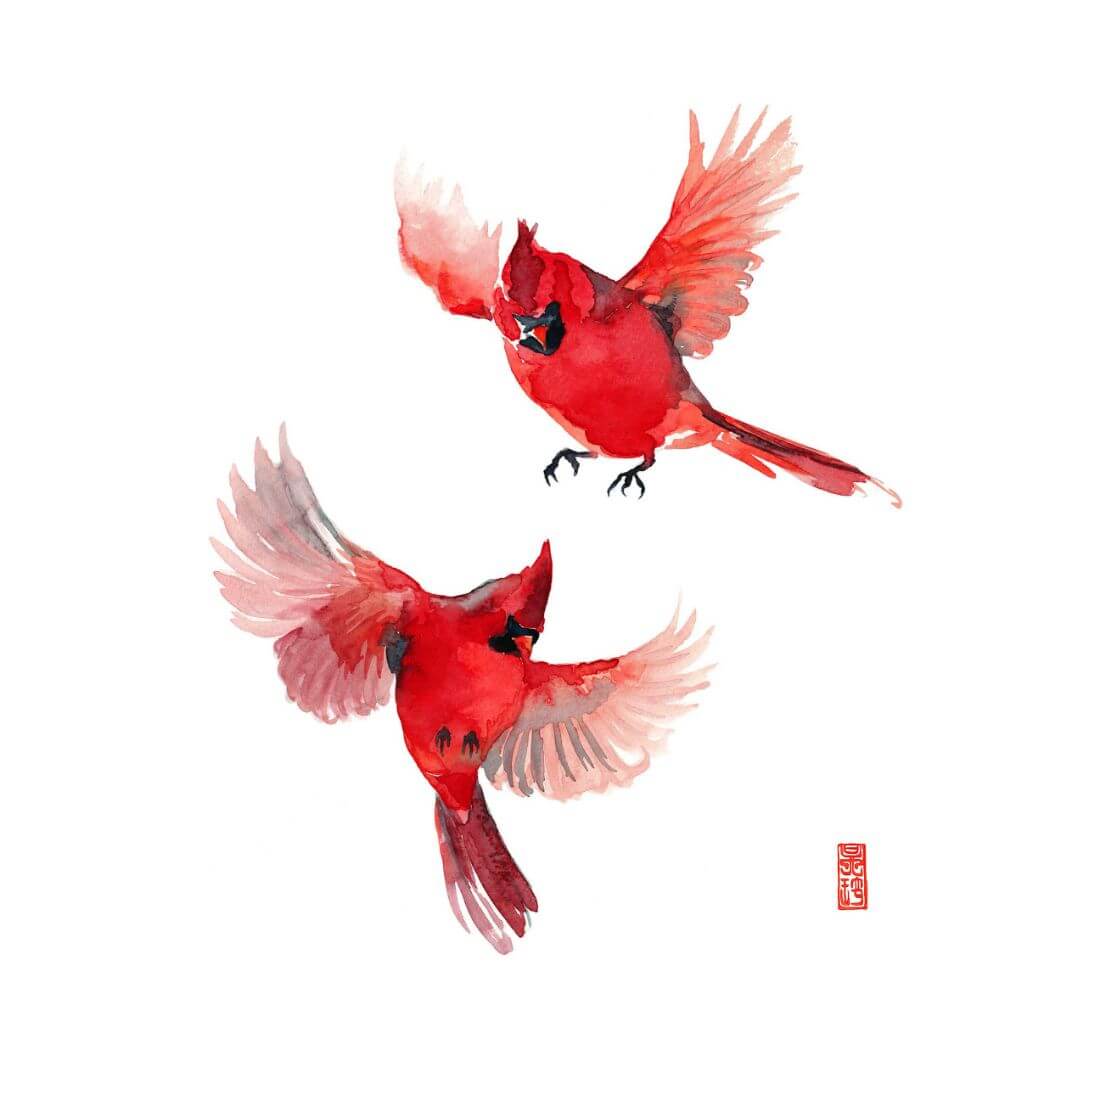 Cardinals Take Wings Watercolor Painting Bird Wildlife Art Print Poster By Sina Irani Buy Posters Frames Canvas Digital Art Prints Small Compact Medium And Large Variants